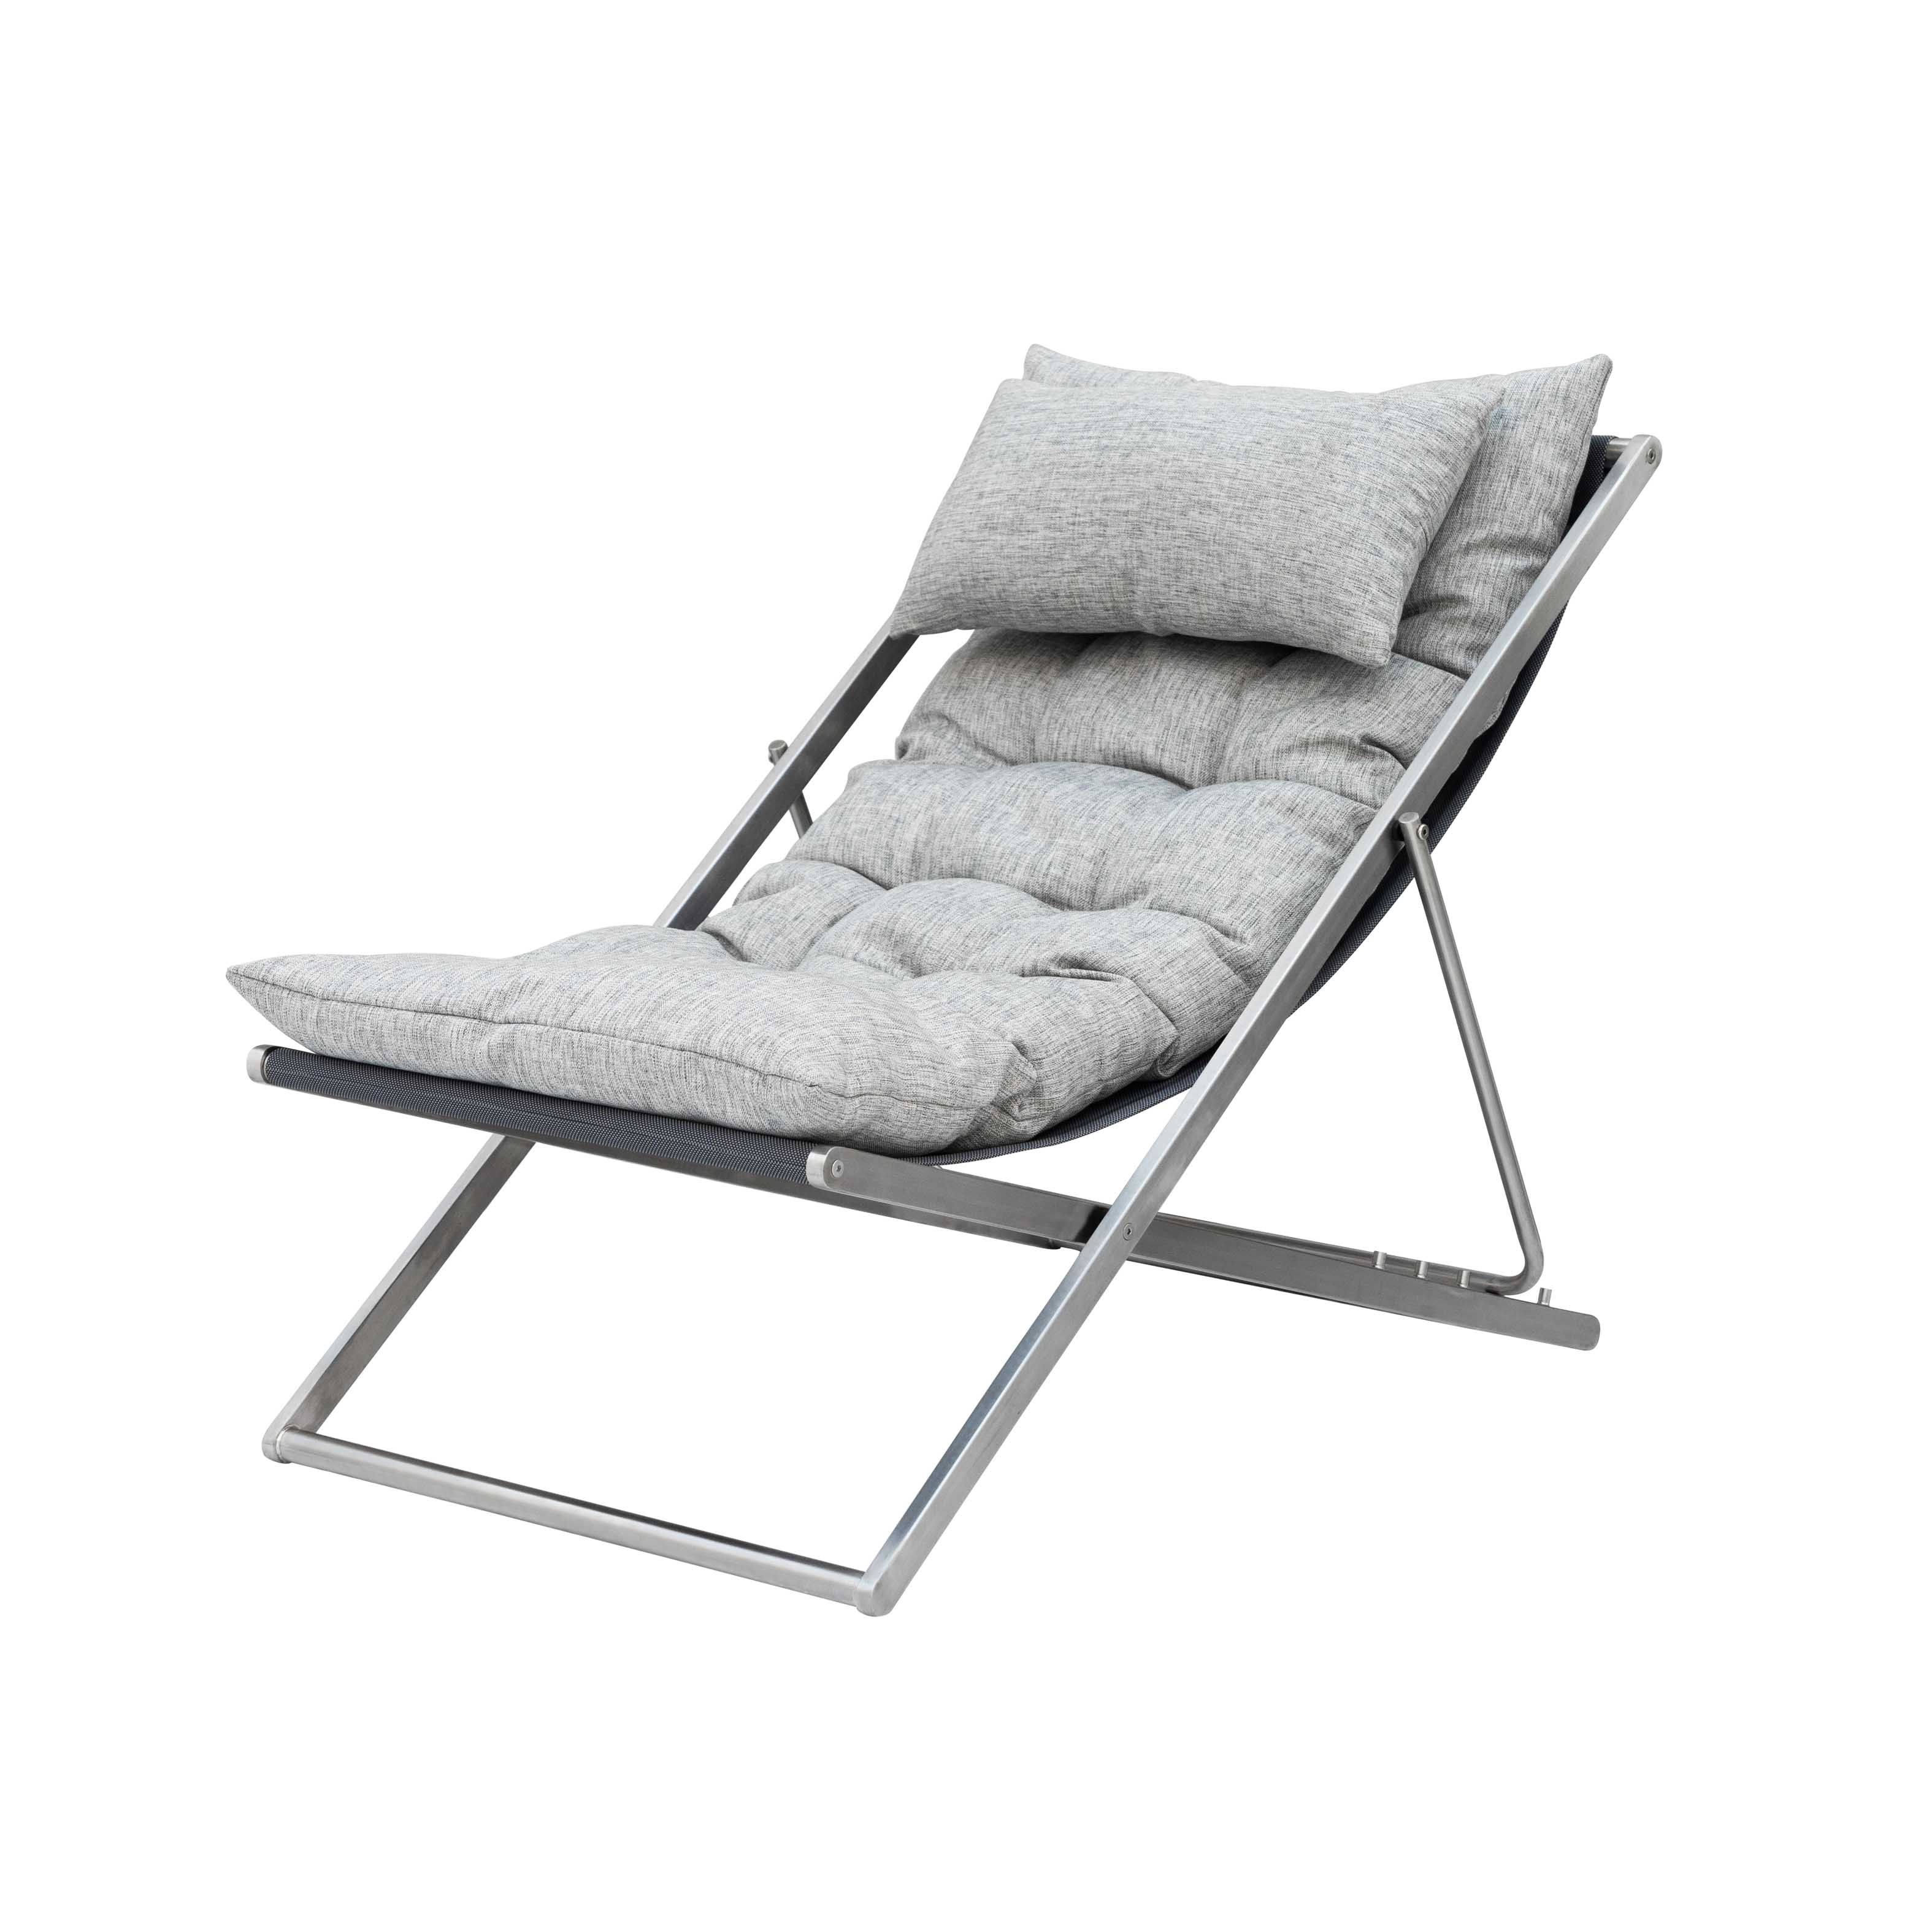 Naples relax chair with footstool Featured Image